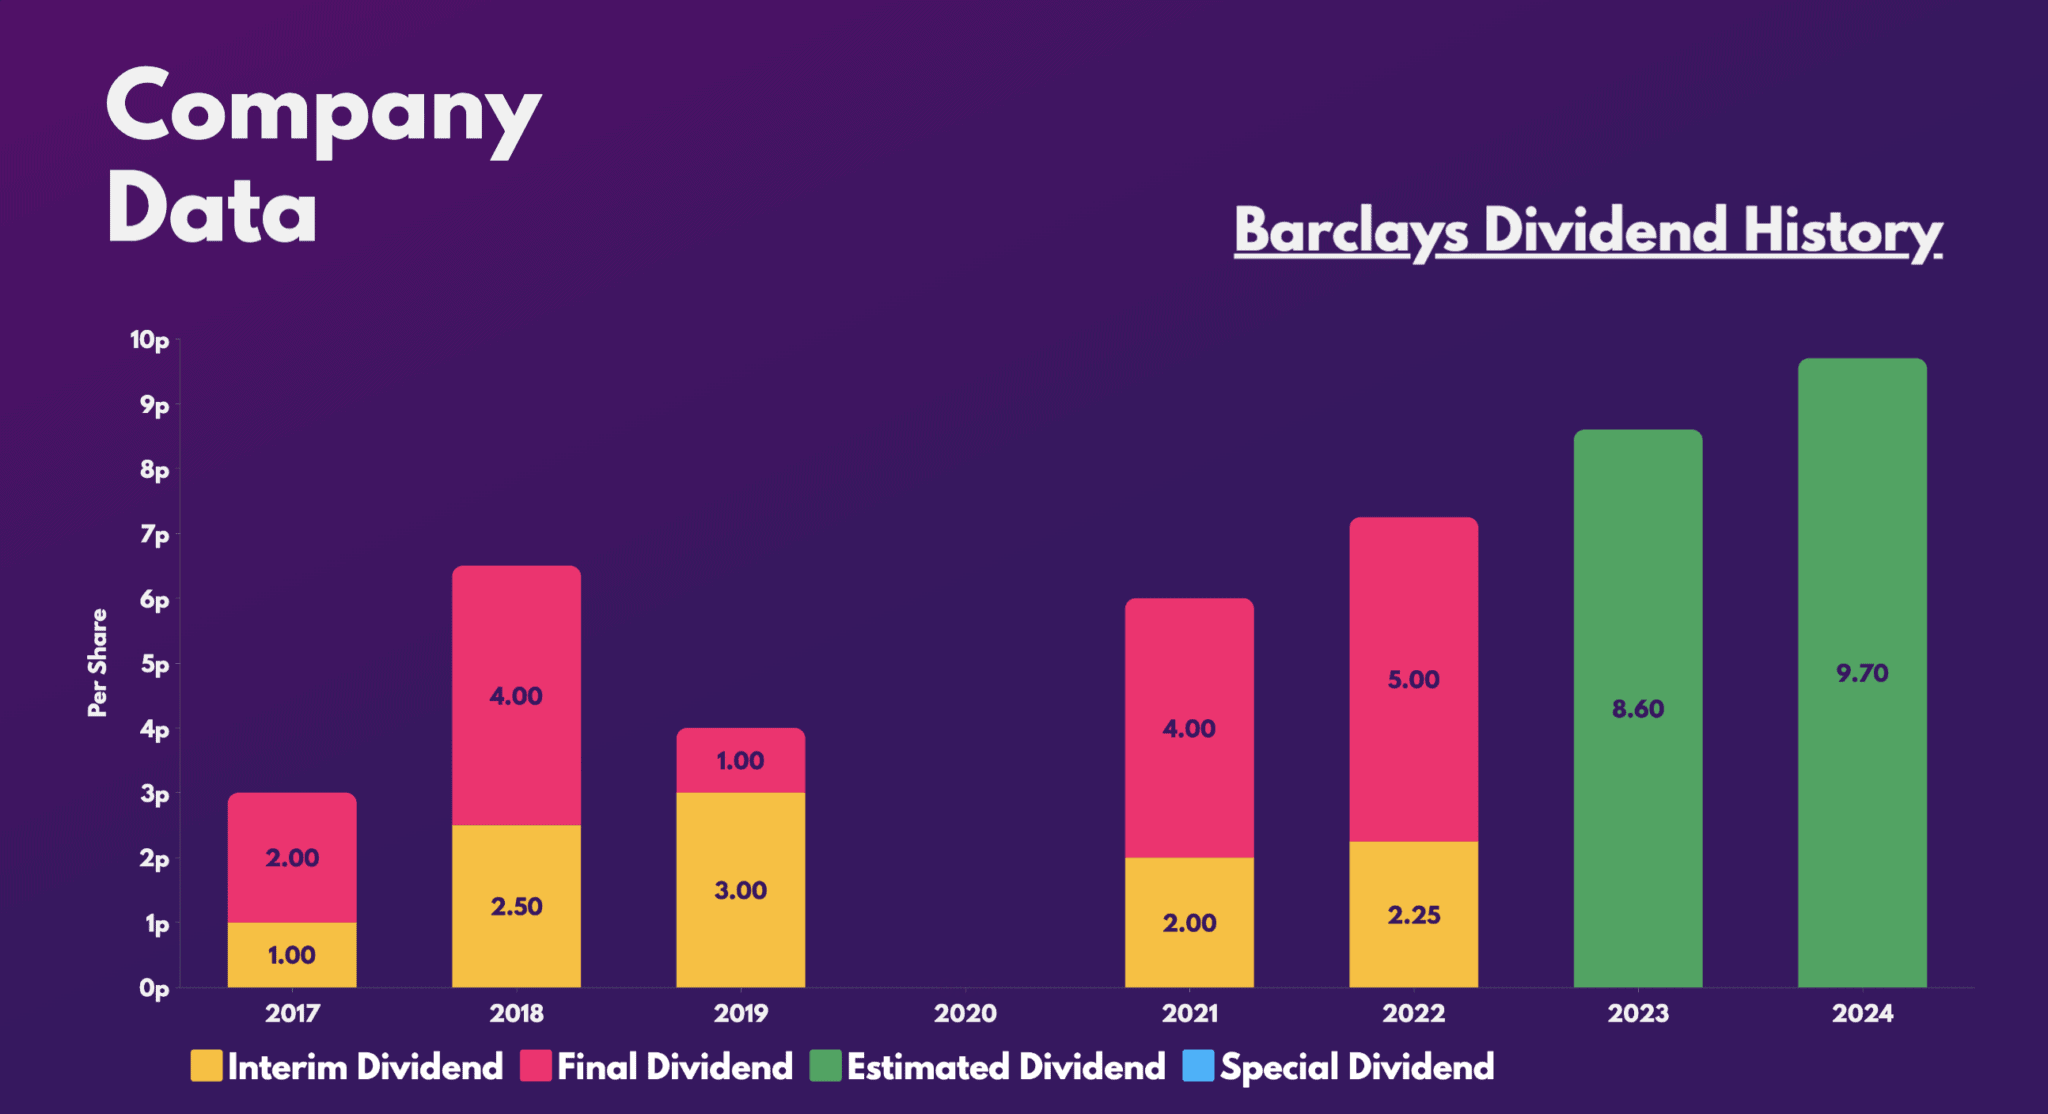 Here's the dividend forecast for Barclays shares in 2023 and 2024 The